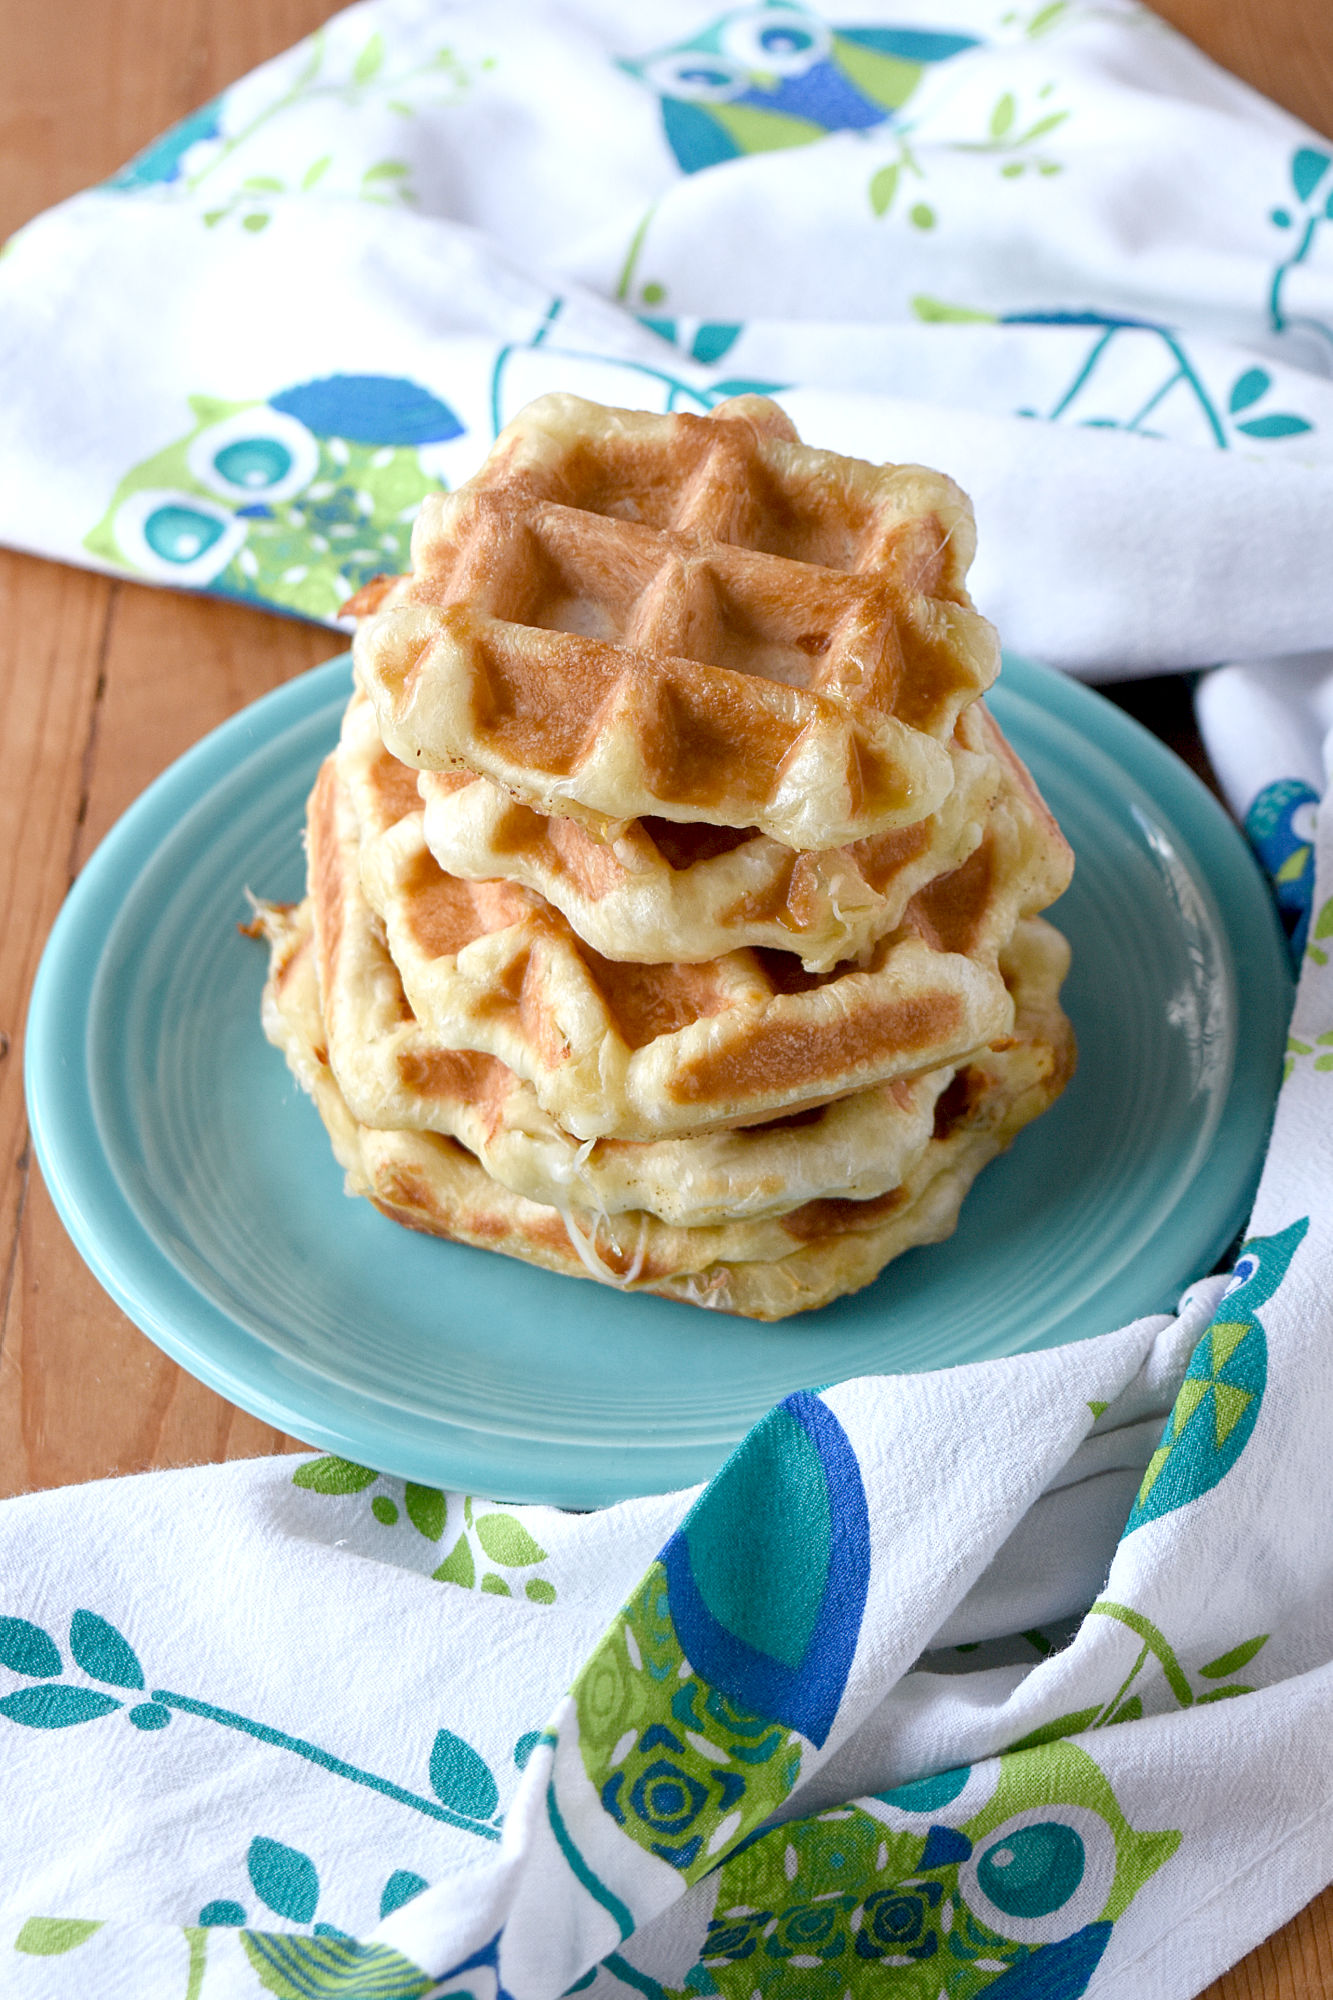 Cheesy Garlic Butter Waffles have only three ingredients.  They’re easy to make and taste so delicious!  #OurFamilyTable